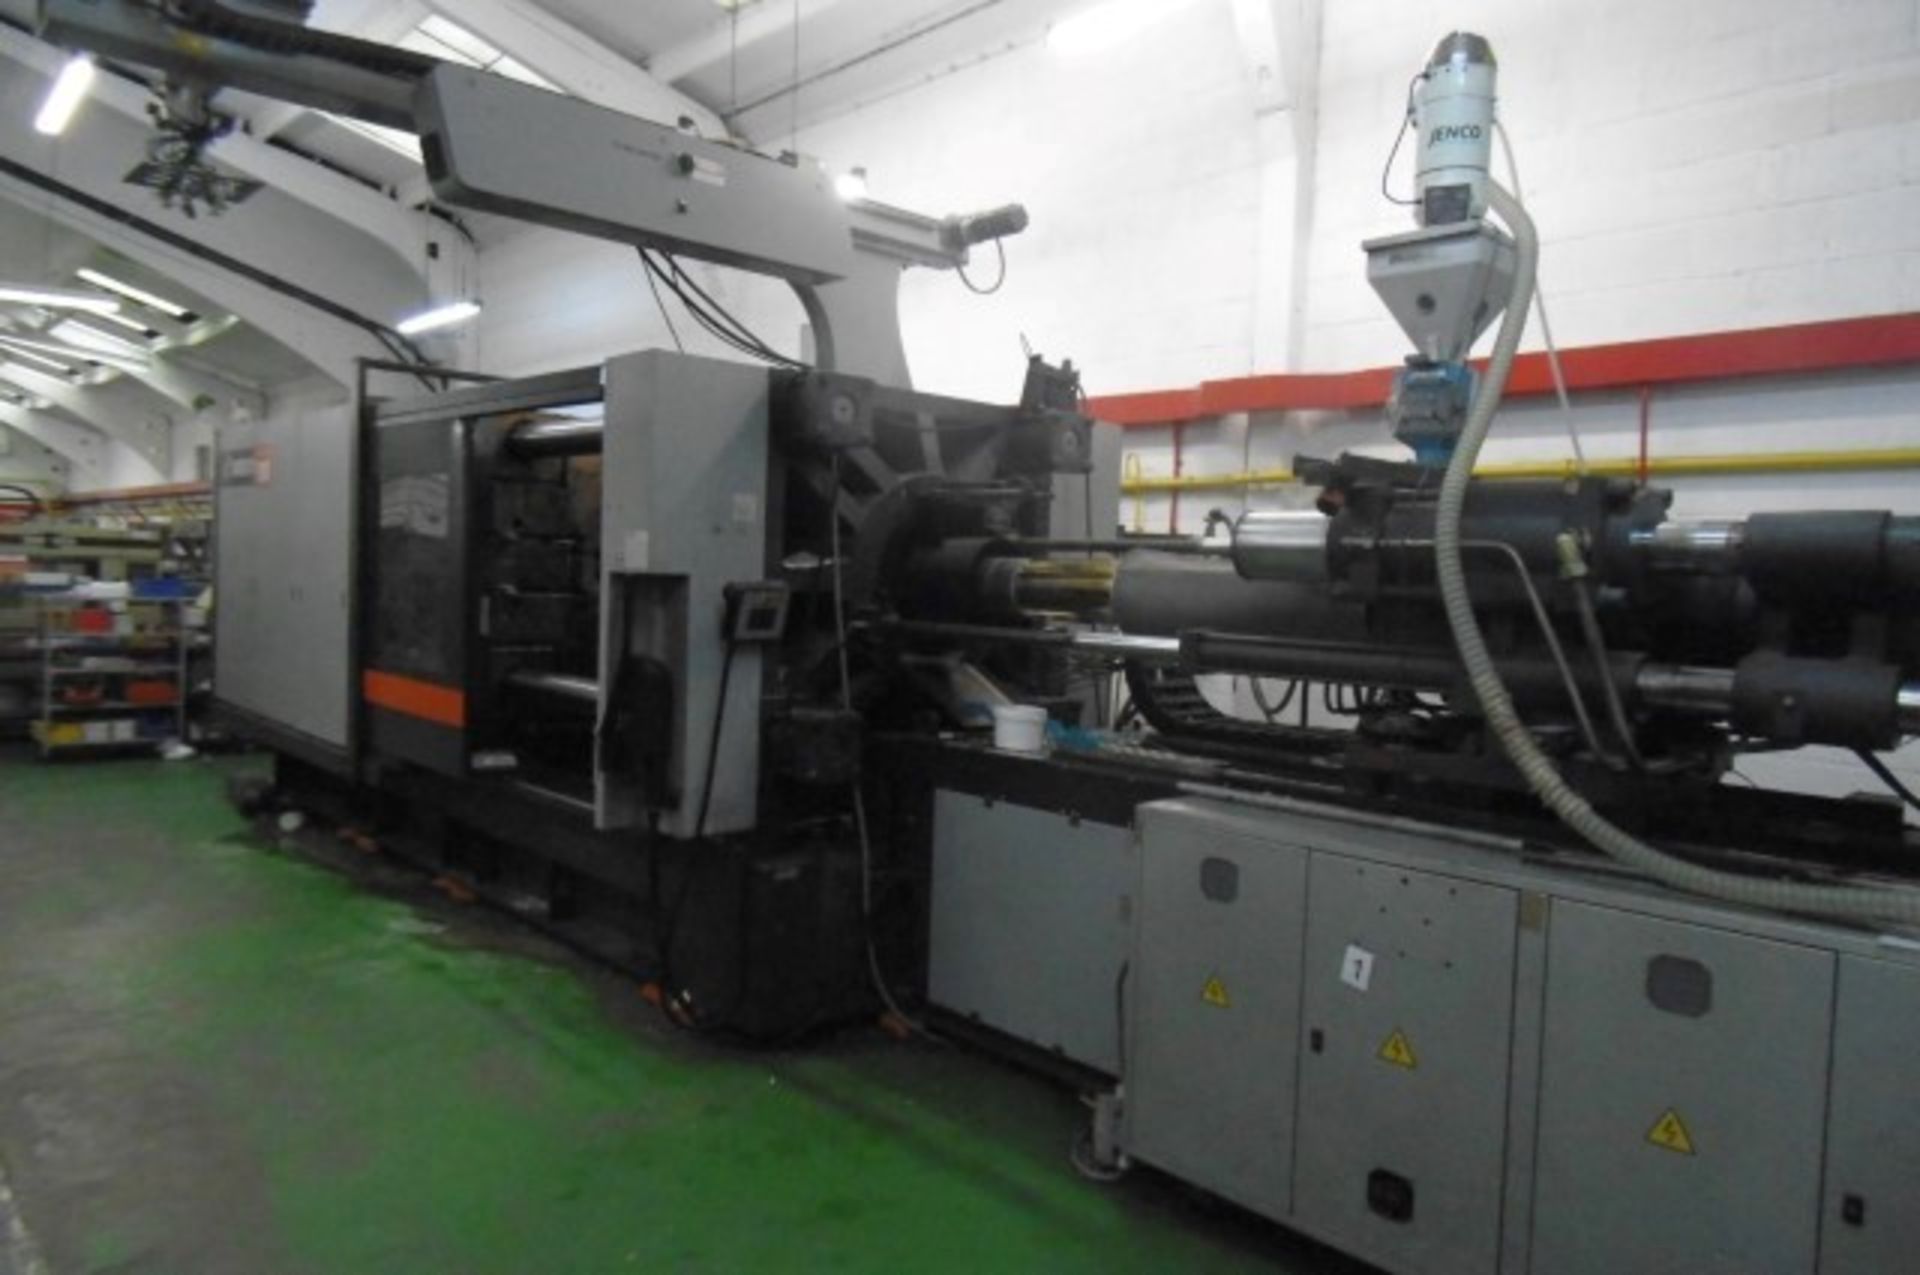 Sandretto 4170/700 Mega TES 7000 plastic injection moulding machine with Dal maschio 3 axis load - Image 4 of 6